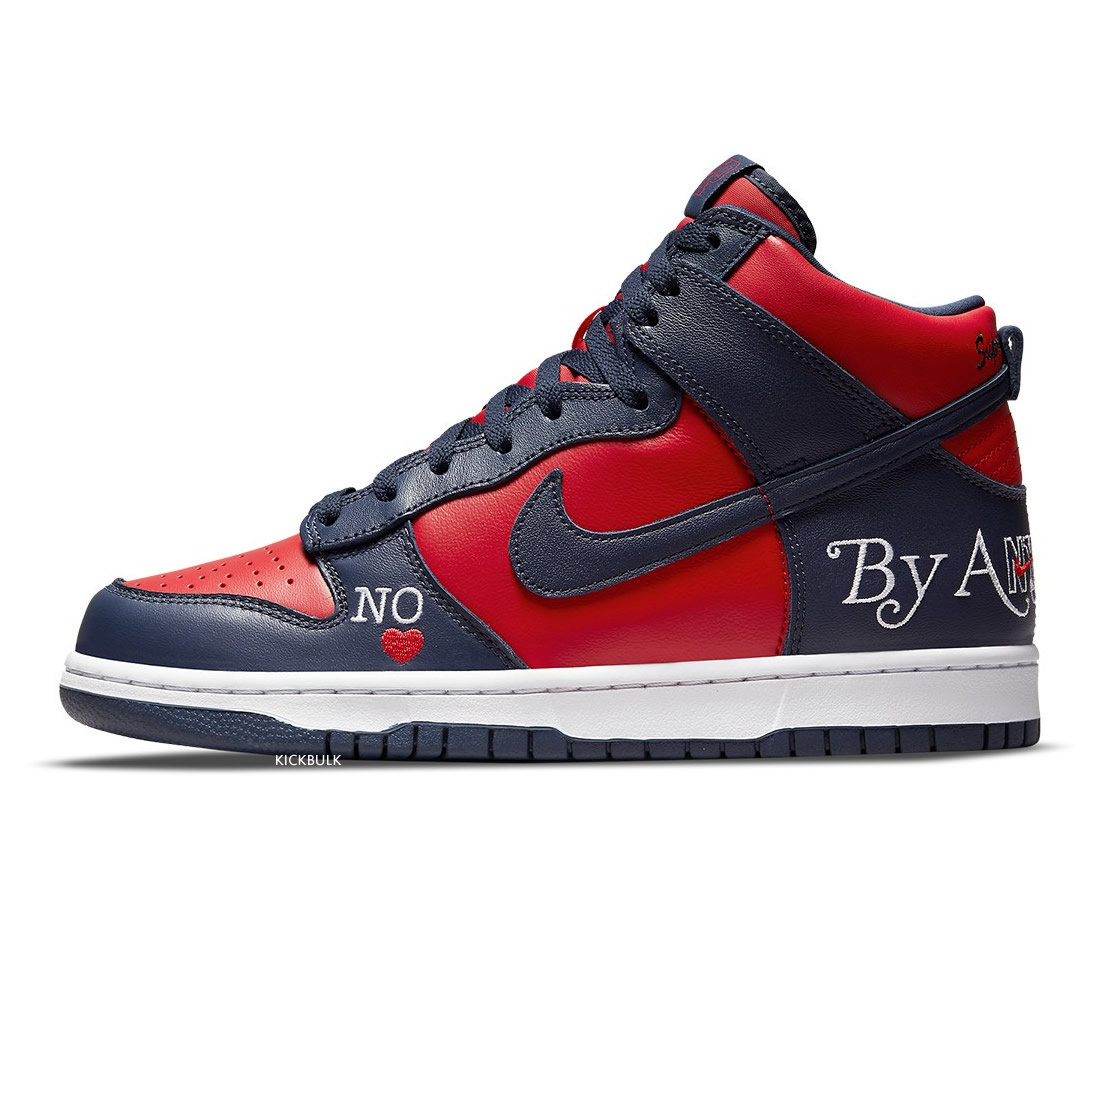 Supreme Nike Dunk High Sb By Any Means Red Navy Dn3741 600 1 - kickbulk.co